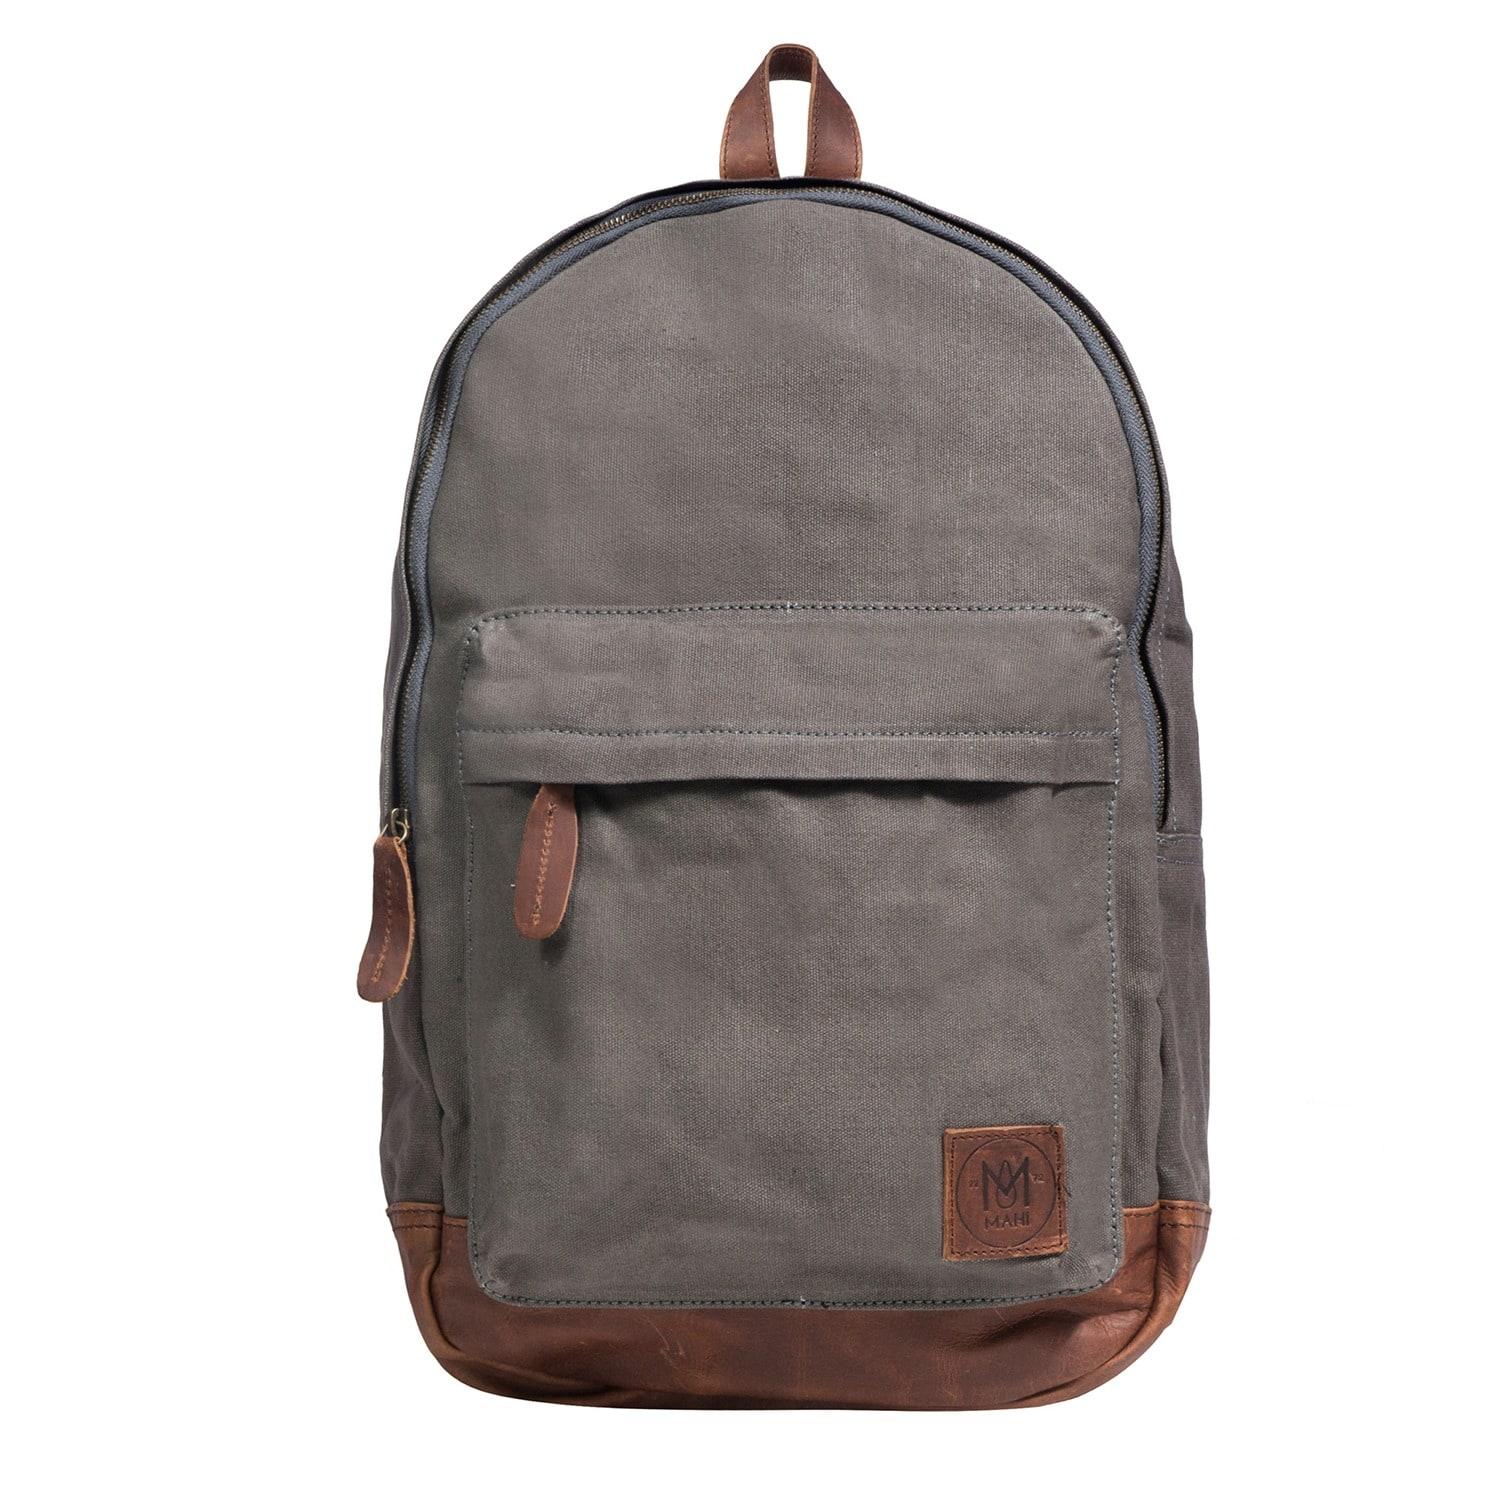 Mahi Leather Canvas Classic Backpack Rucksack In Grey Canvas in Gray for Men | Lyst